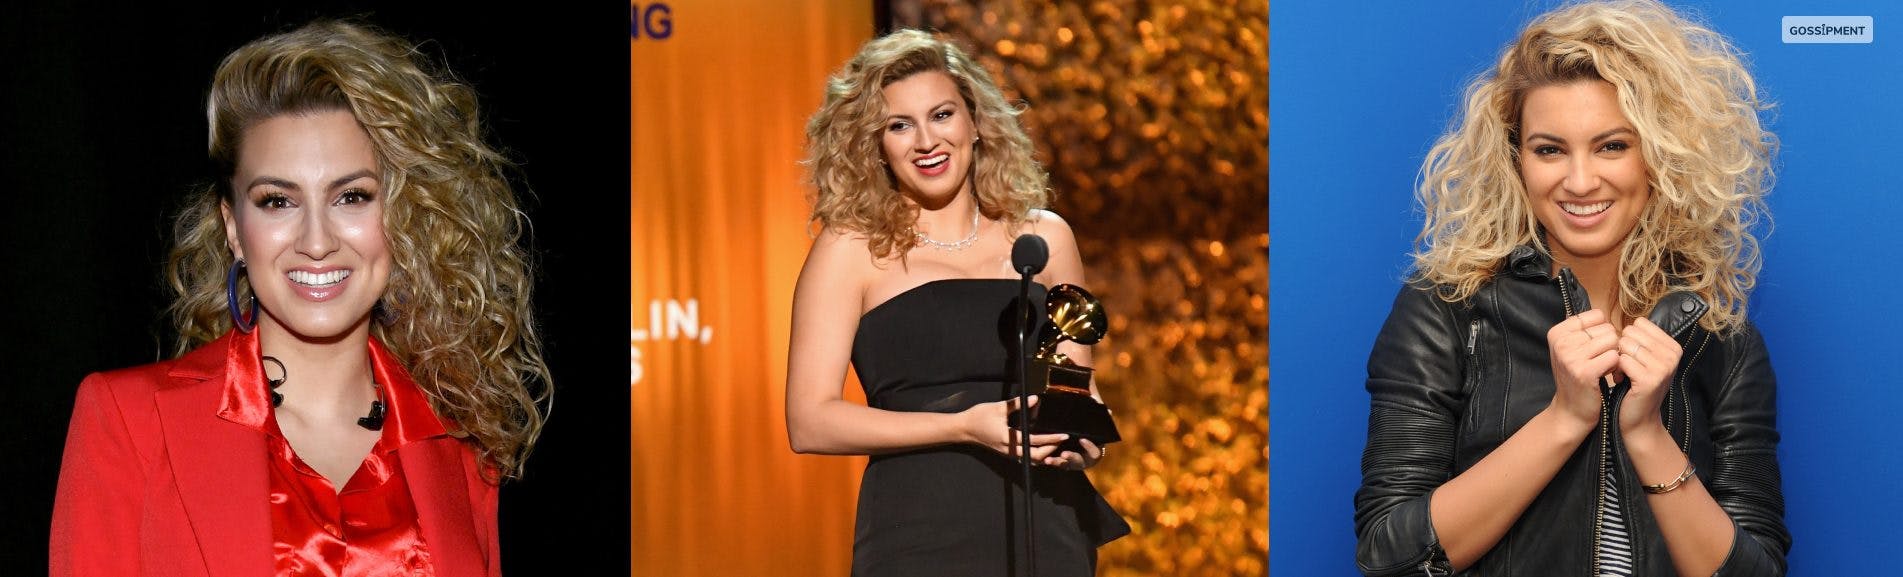 Cover Image for Grammy Winner Tori Kelly Hospitalized After Collapsing at Dinner With Friends